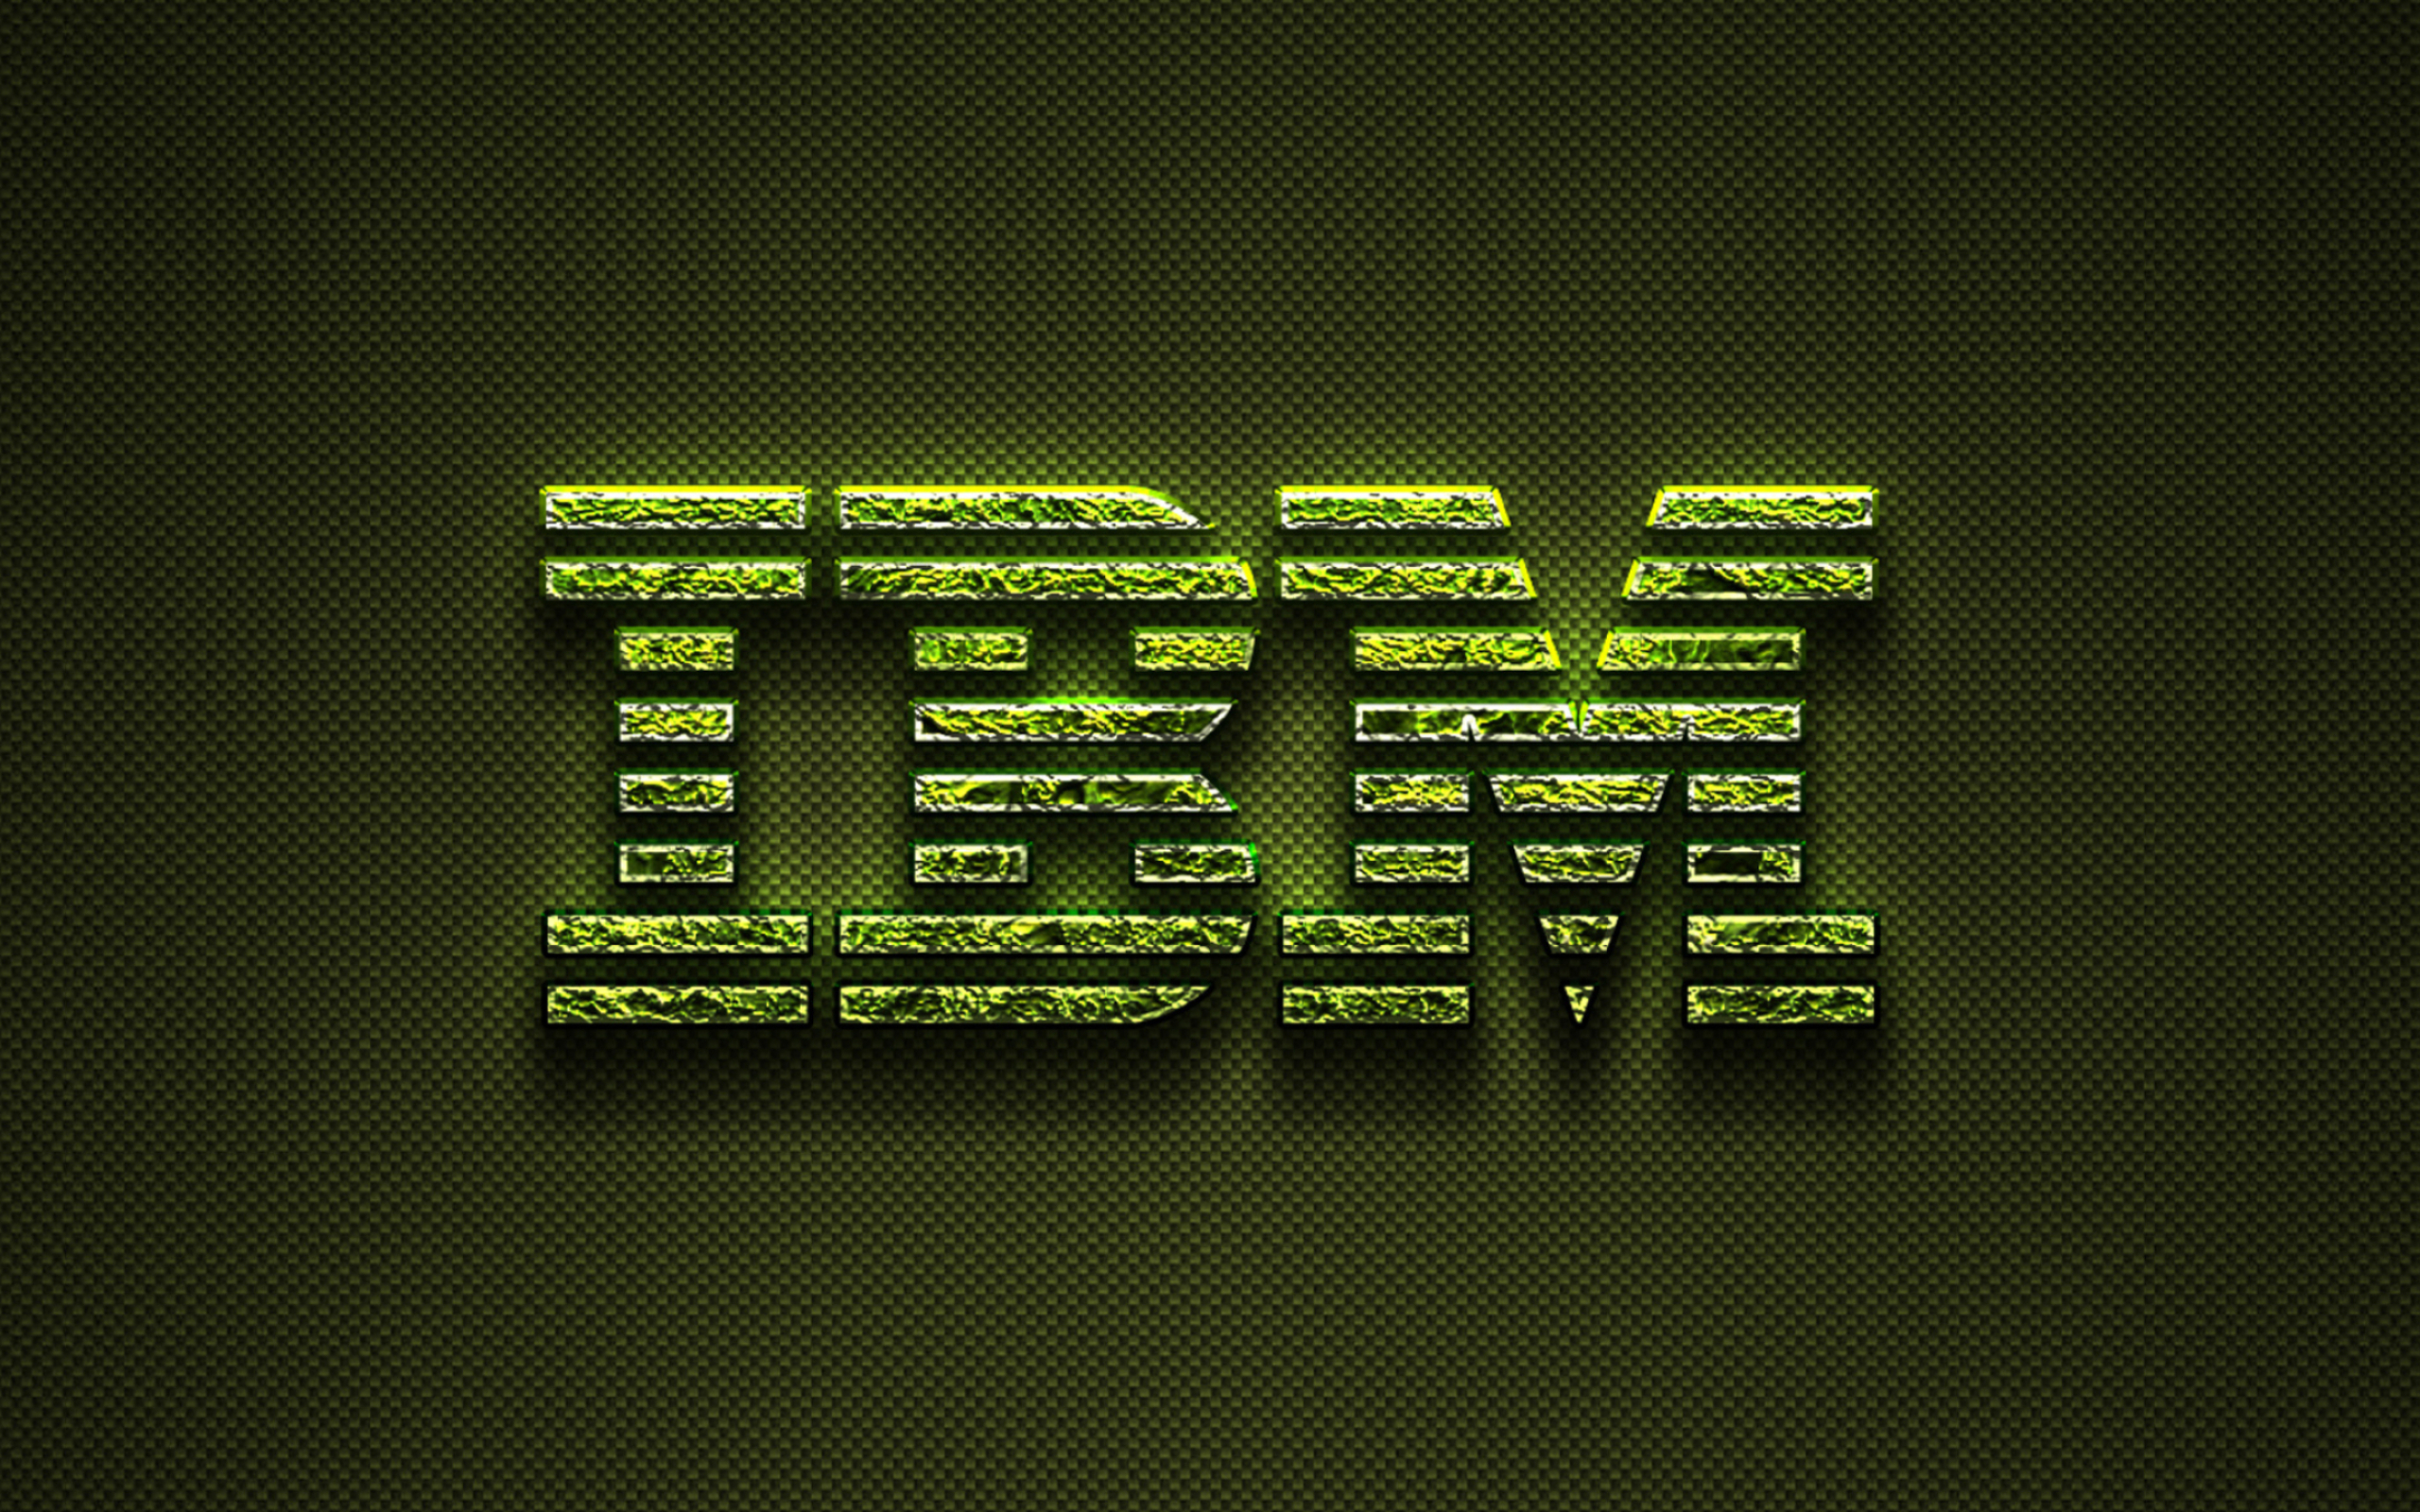 Download wallpapers IBM logo, green creative logo, floral art logo, IBM emblem, green carbon fiber texture, IBM, creative art for desktop with resolution. High Quality HD pictures wallpapers 2560x1600